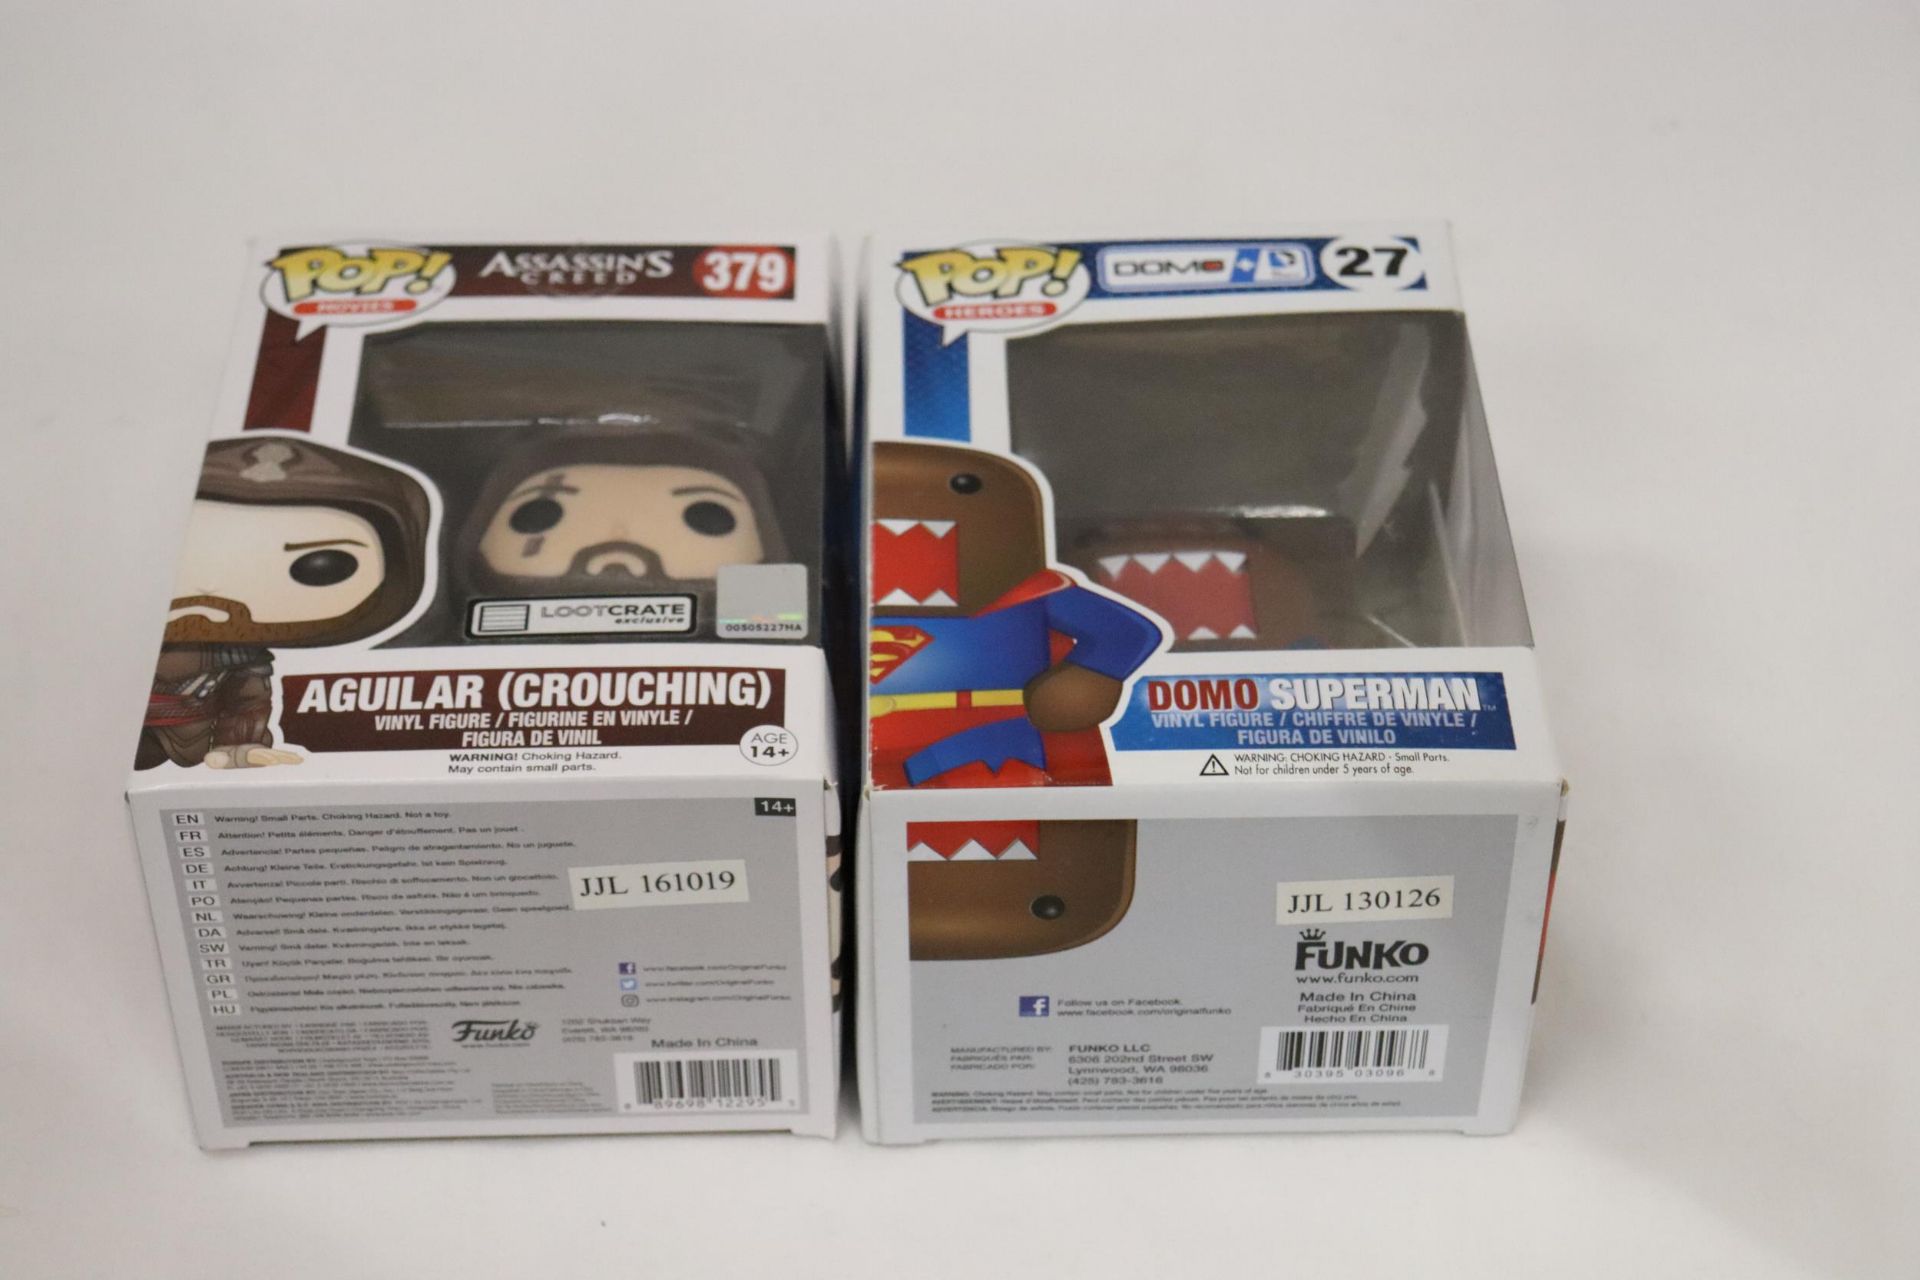 TWO FUNKO POP VINYL FIGURES IN BOXES, BOTH VAULTED, ONE EXCLUSIVE - Image 7 of 7